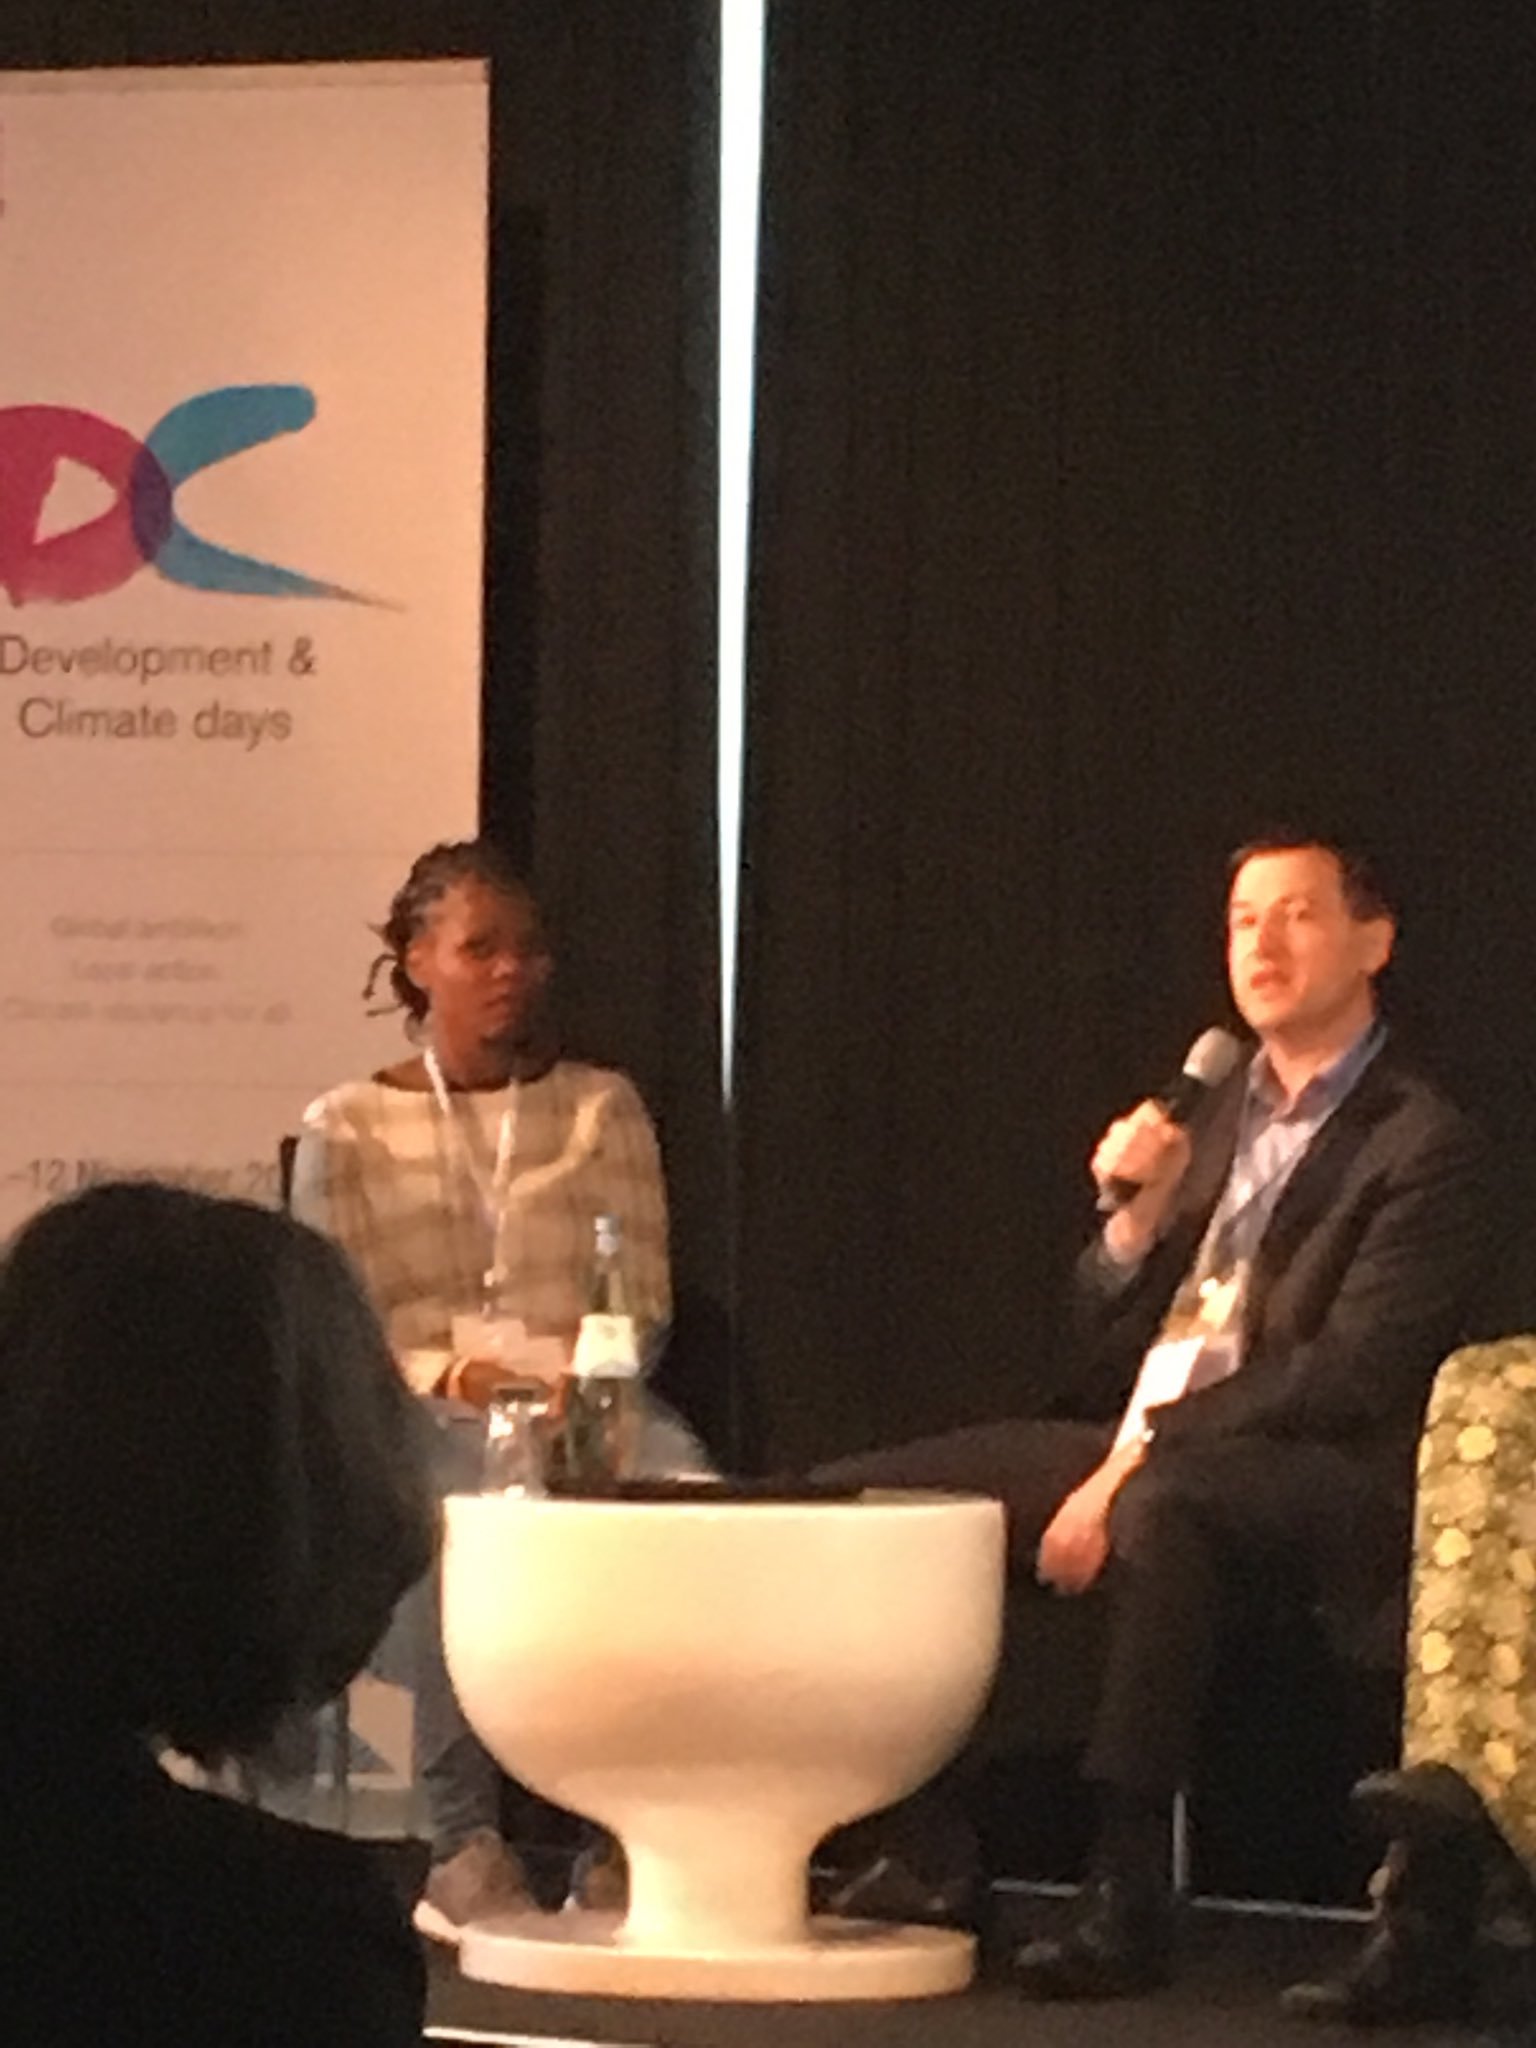 Story Edward Cameron tells how we have to speak each other’s languages to build collaboration 4 climate action #DCdays17 #WeMeanBusiness https://t.co/6EAKGD4kbv